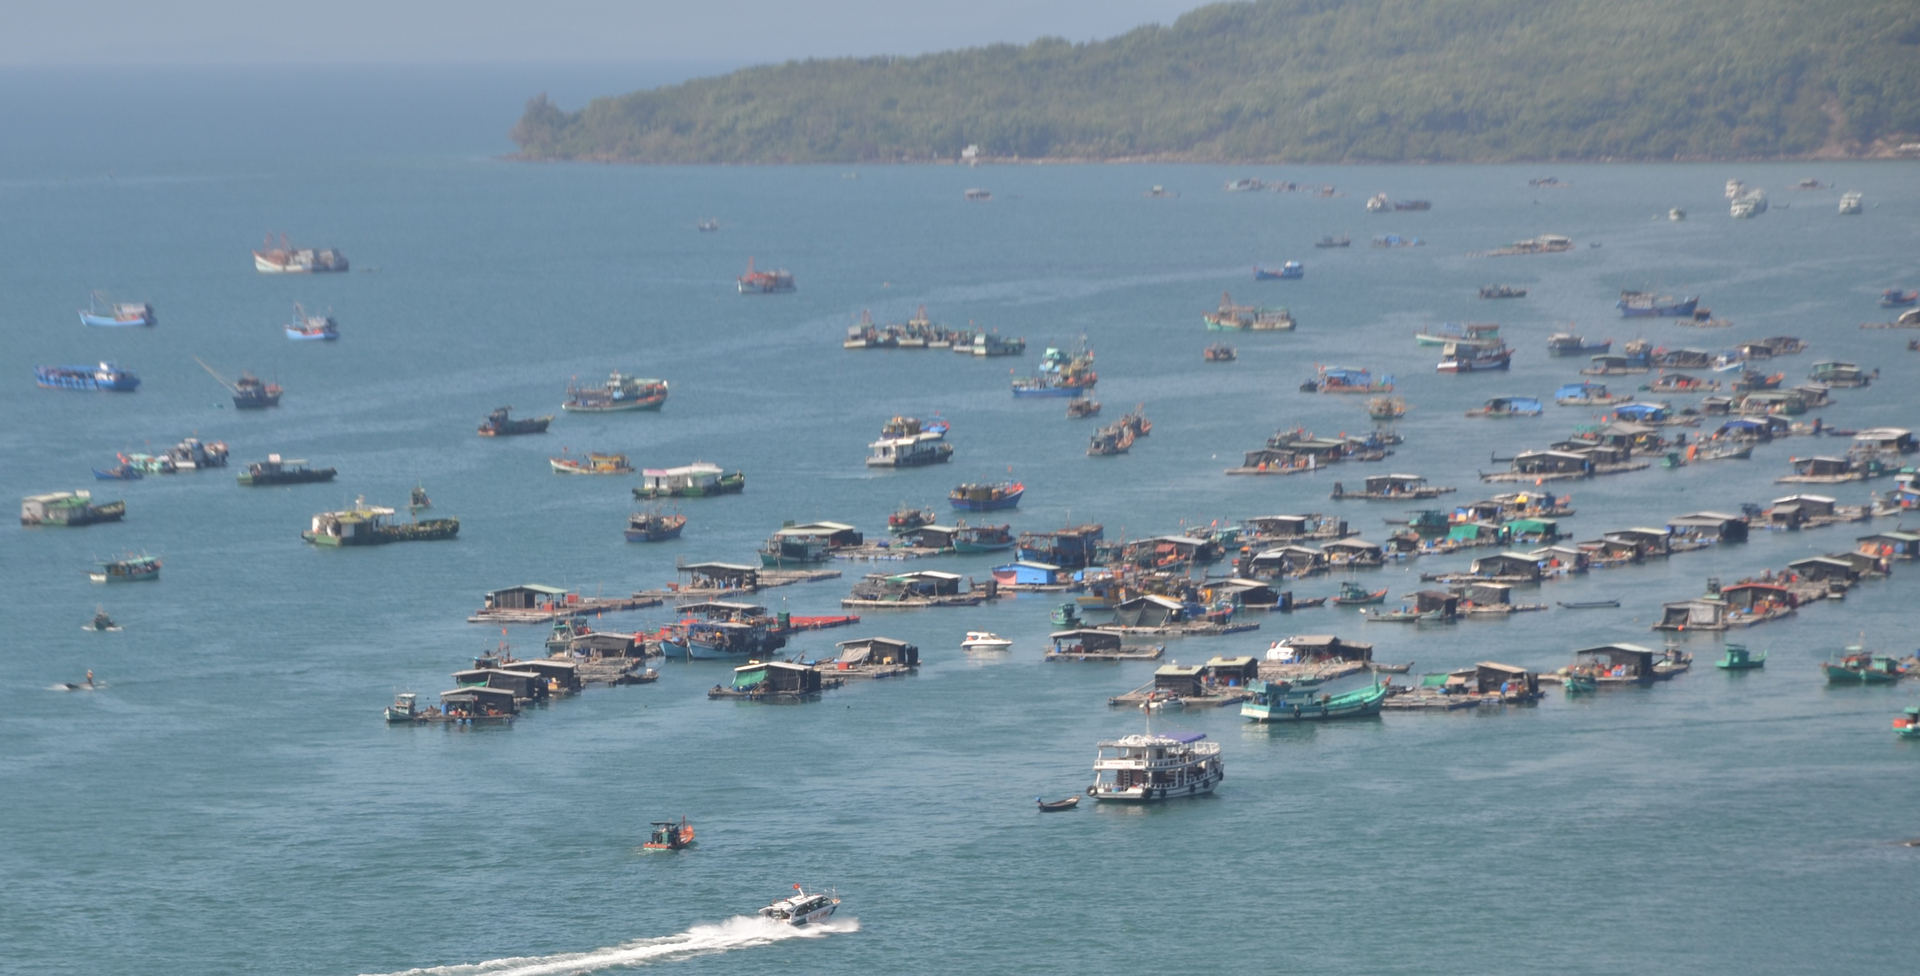 Marine conservation and tourism development are challenges for many countries at present. Photo: Hai Nam.